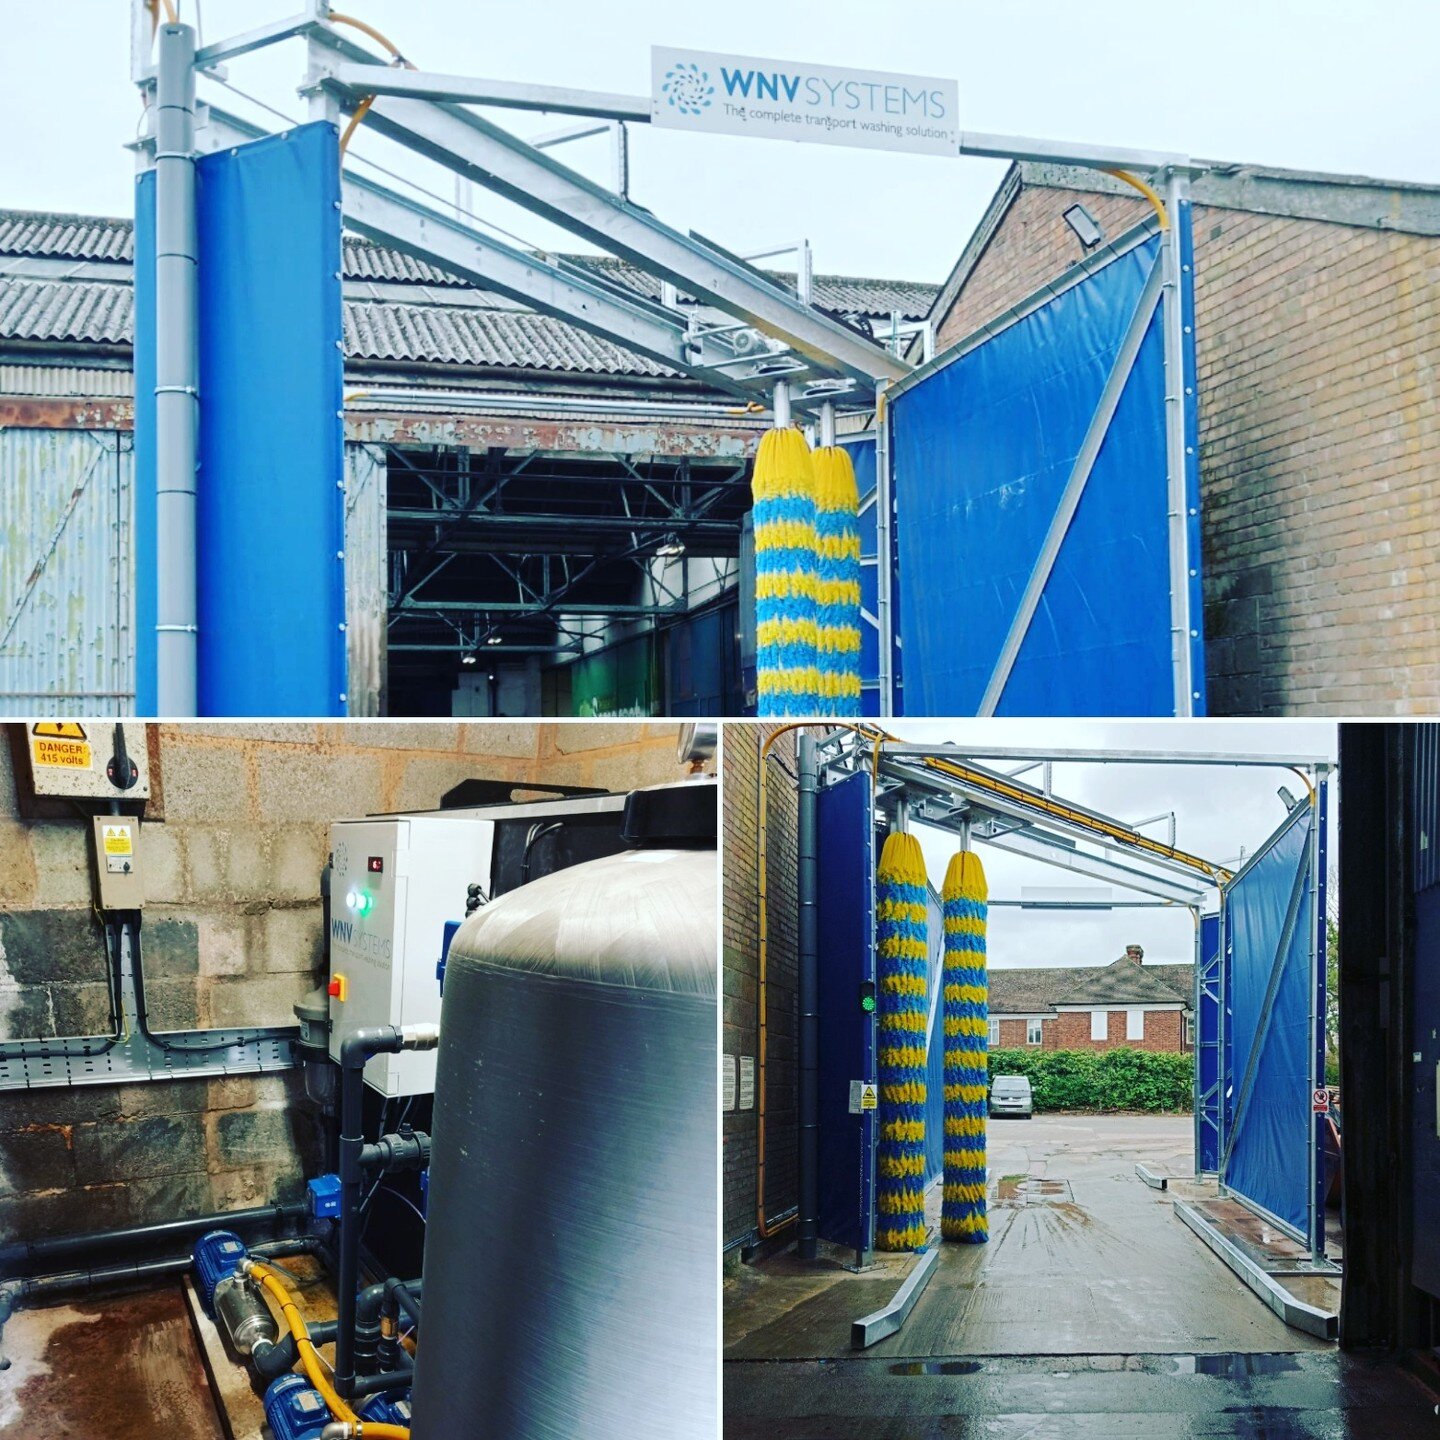 Another great WNV DF2020 Drive Through Bus Wash installation completed for FirstGroup plc at First Bus Taunton depot. #buswash #wnv #bus #wnvsystems #drivethrough #drivethru #firstgroup #firstwestofengland #bath #wash #innovation #engineering #BusWas